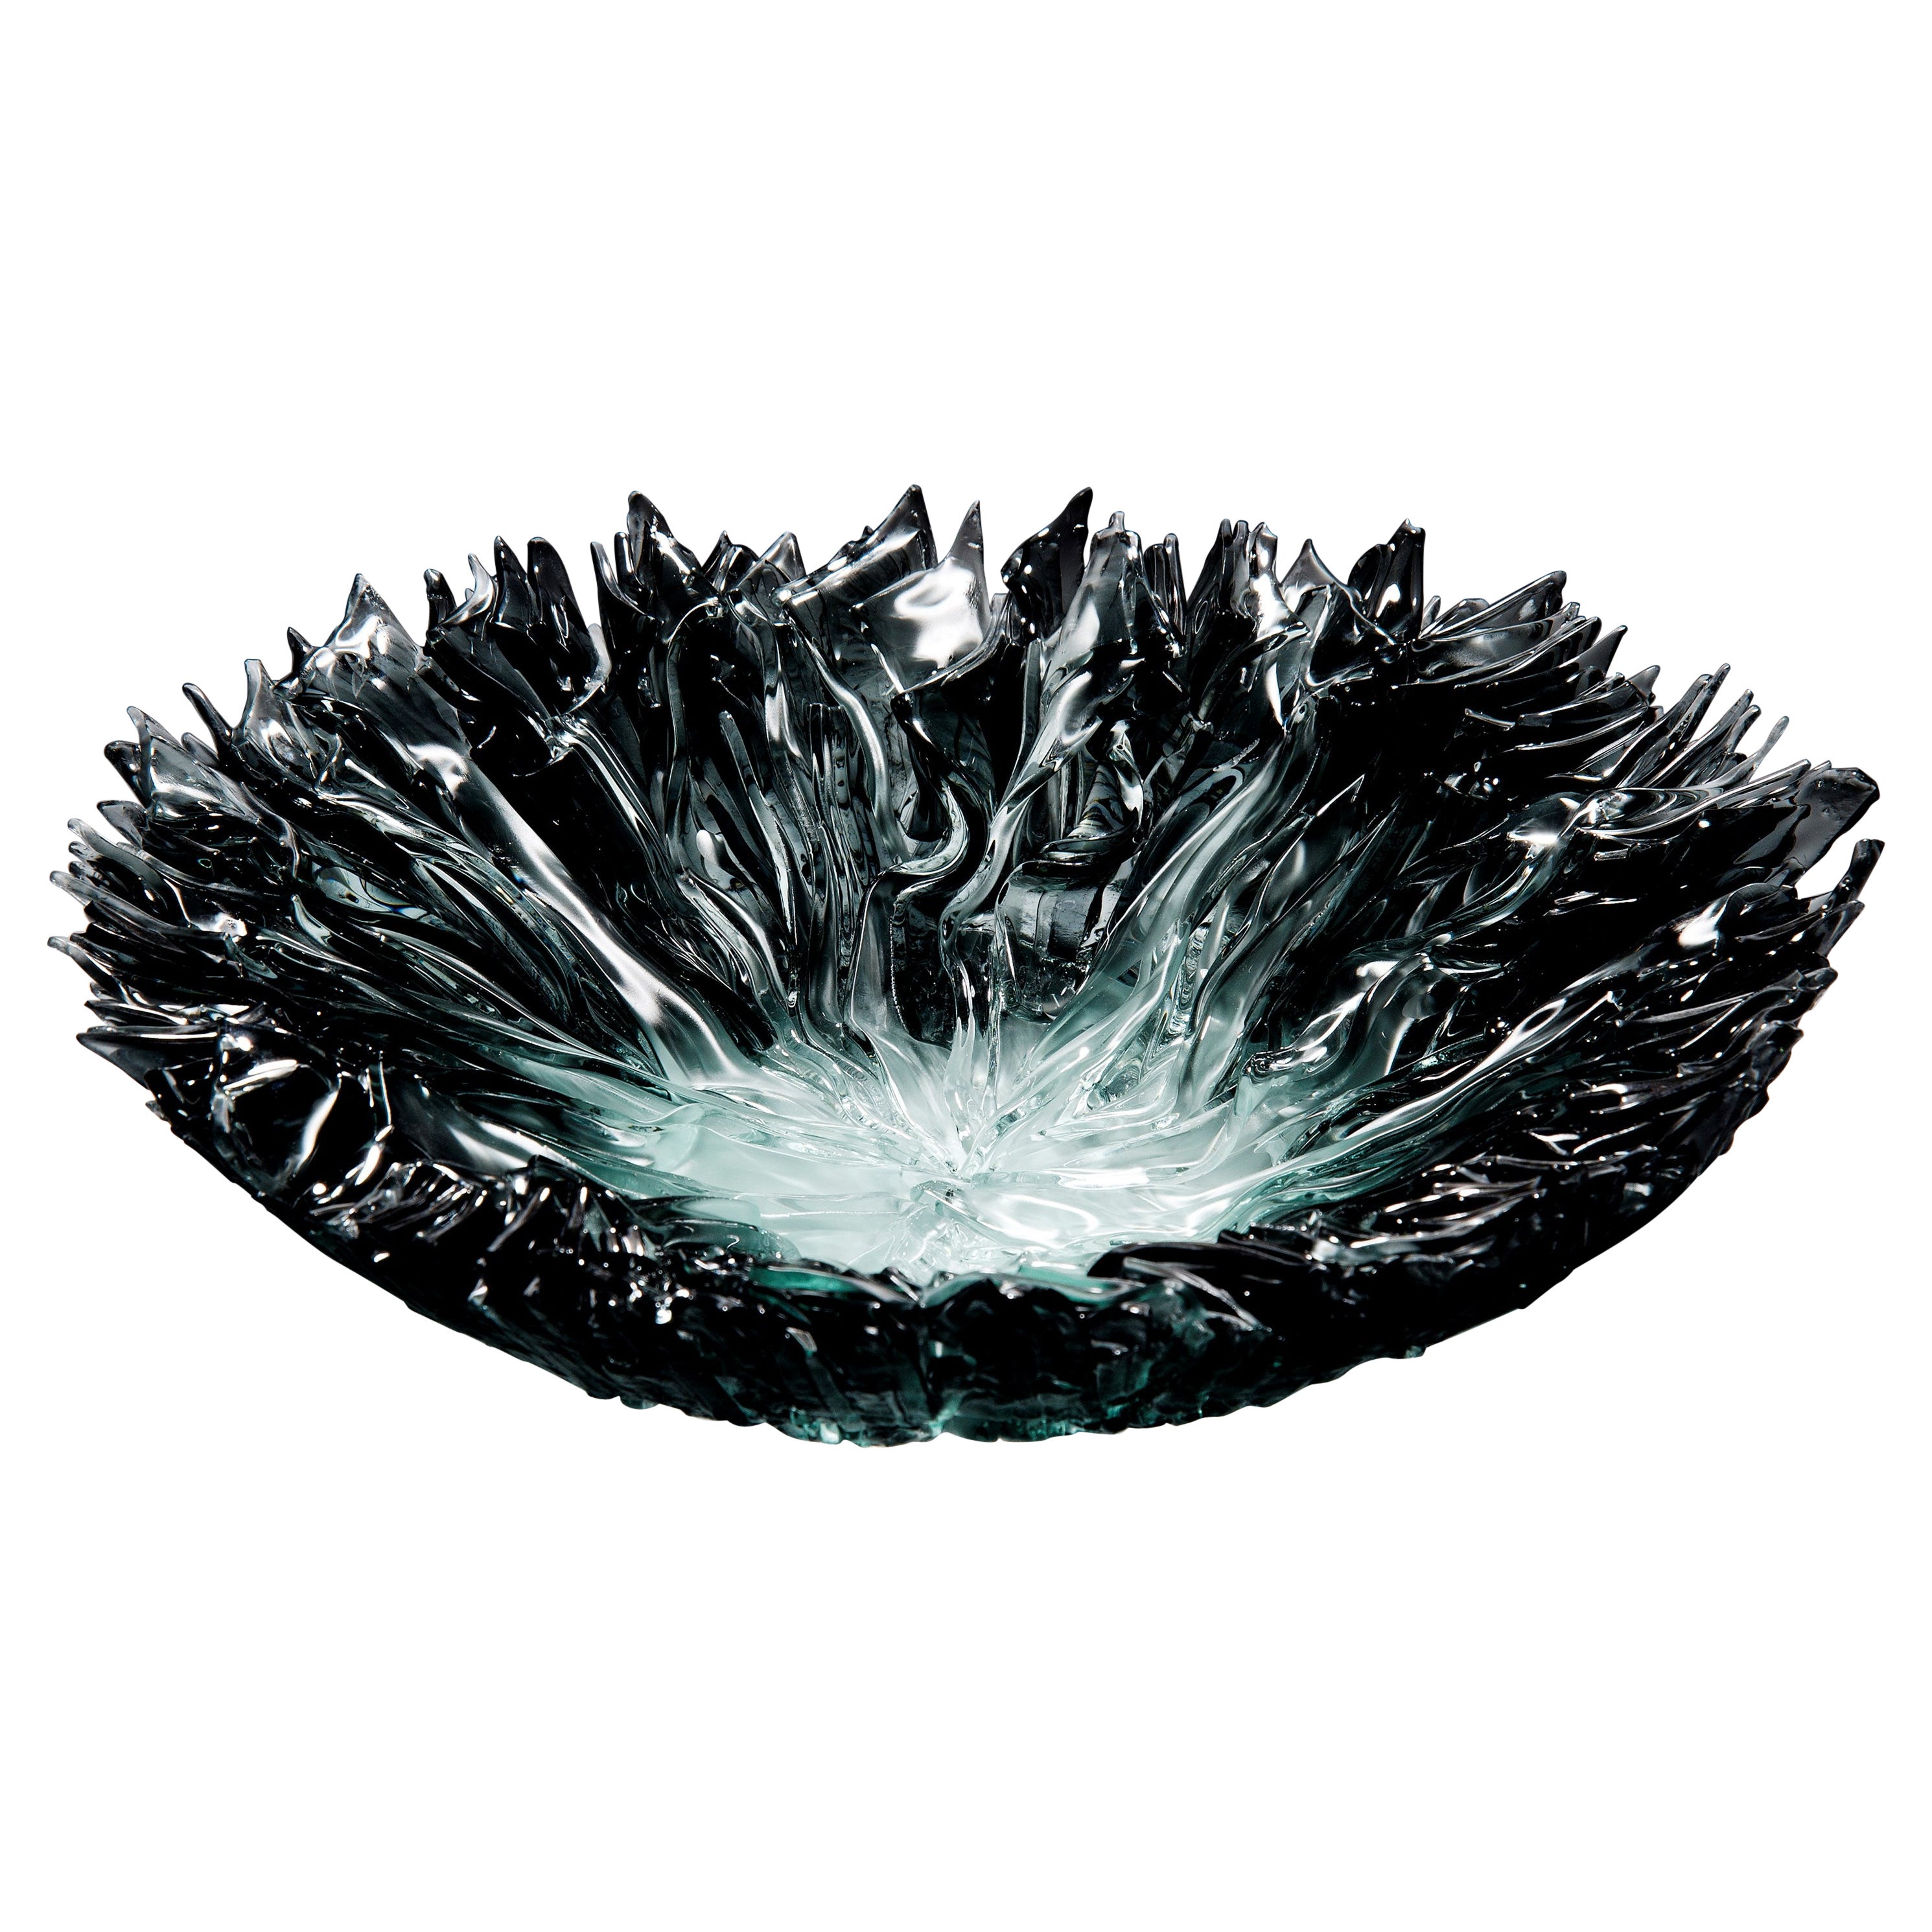 Bloom Bowl in Grey, Glass Textured Sculptural Centrepiece by Wayne Charmer